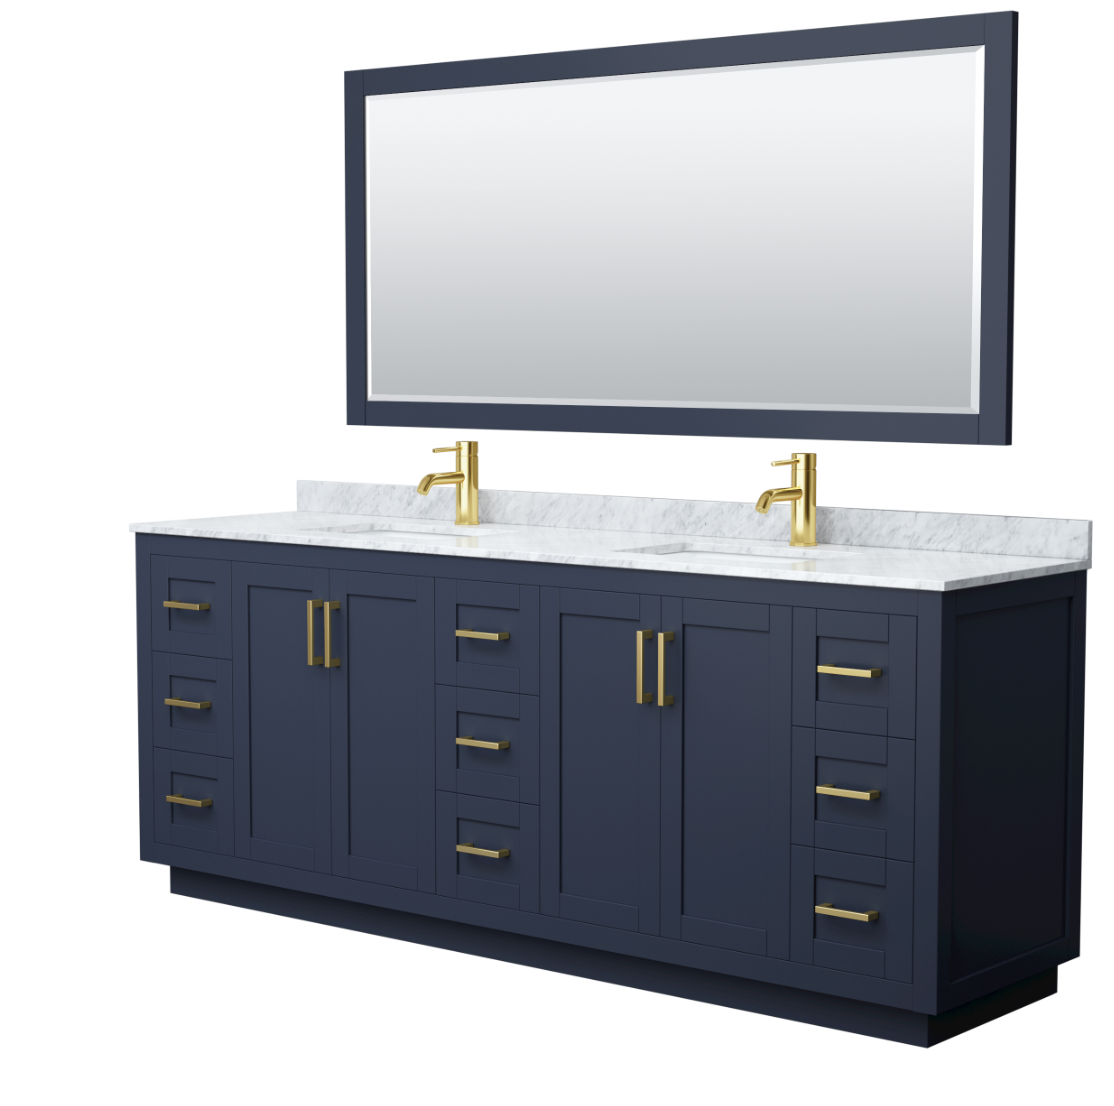 84" Double Bathroom Vanity in 4 color options, 3 Countertop options, and 3 hardware options 